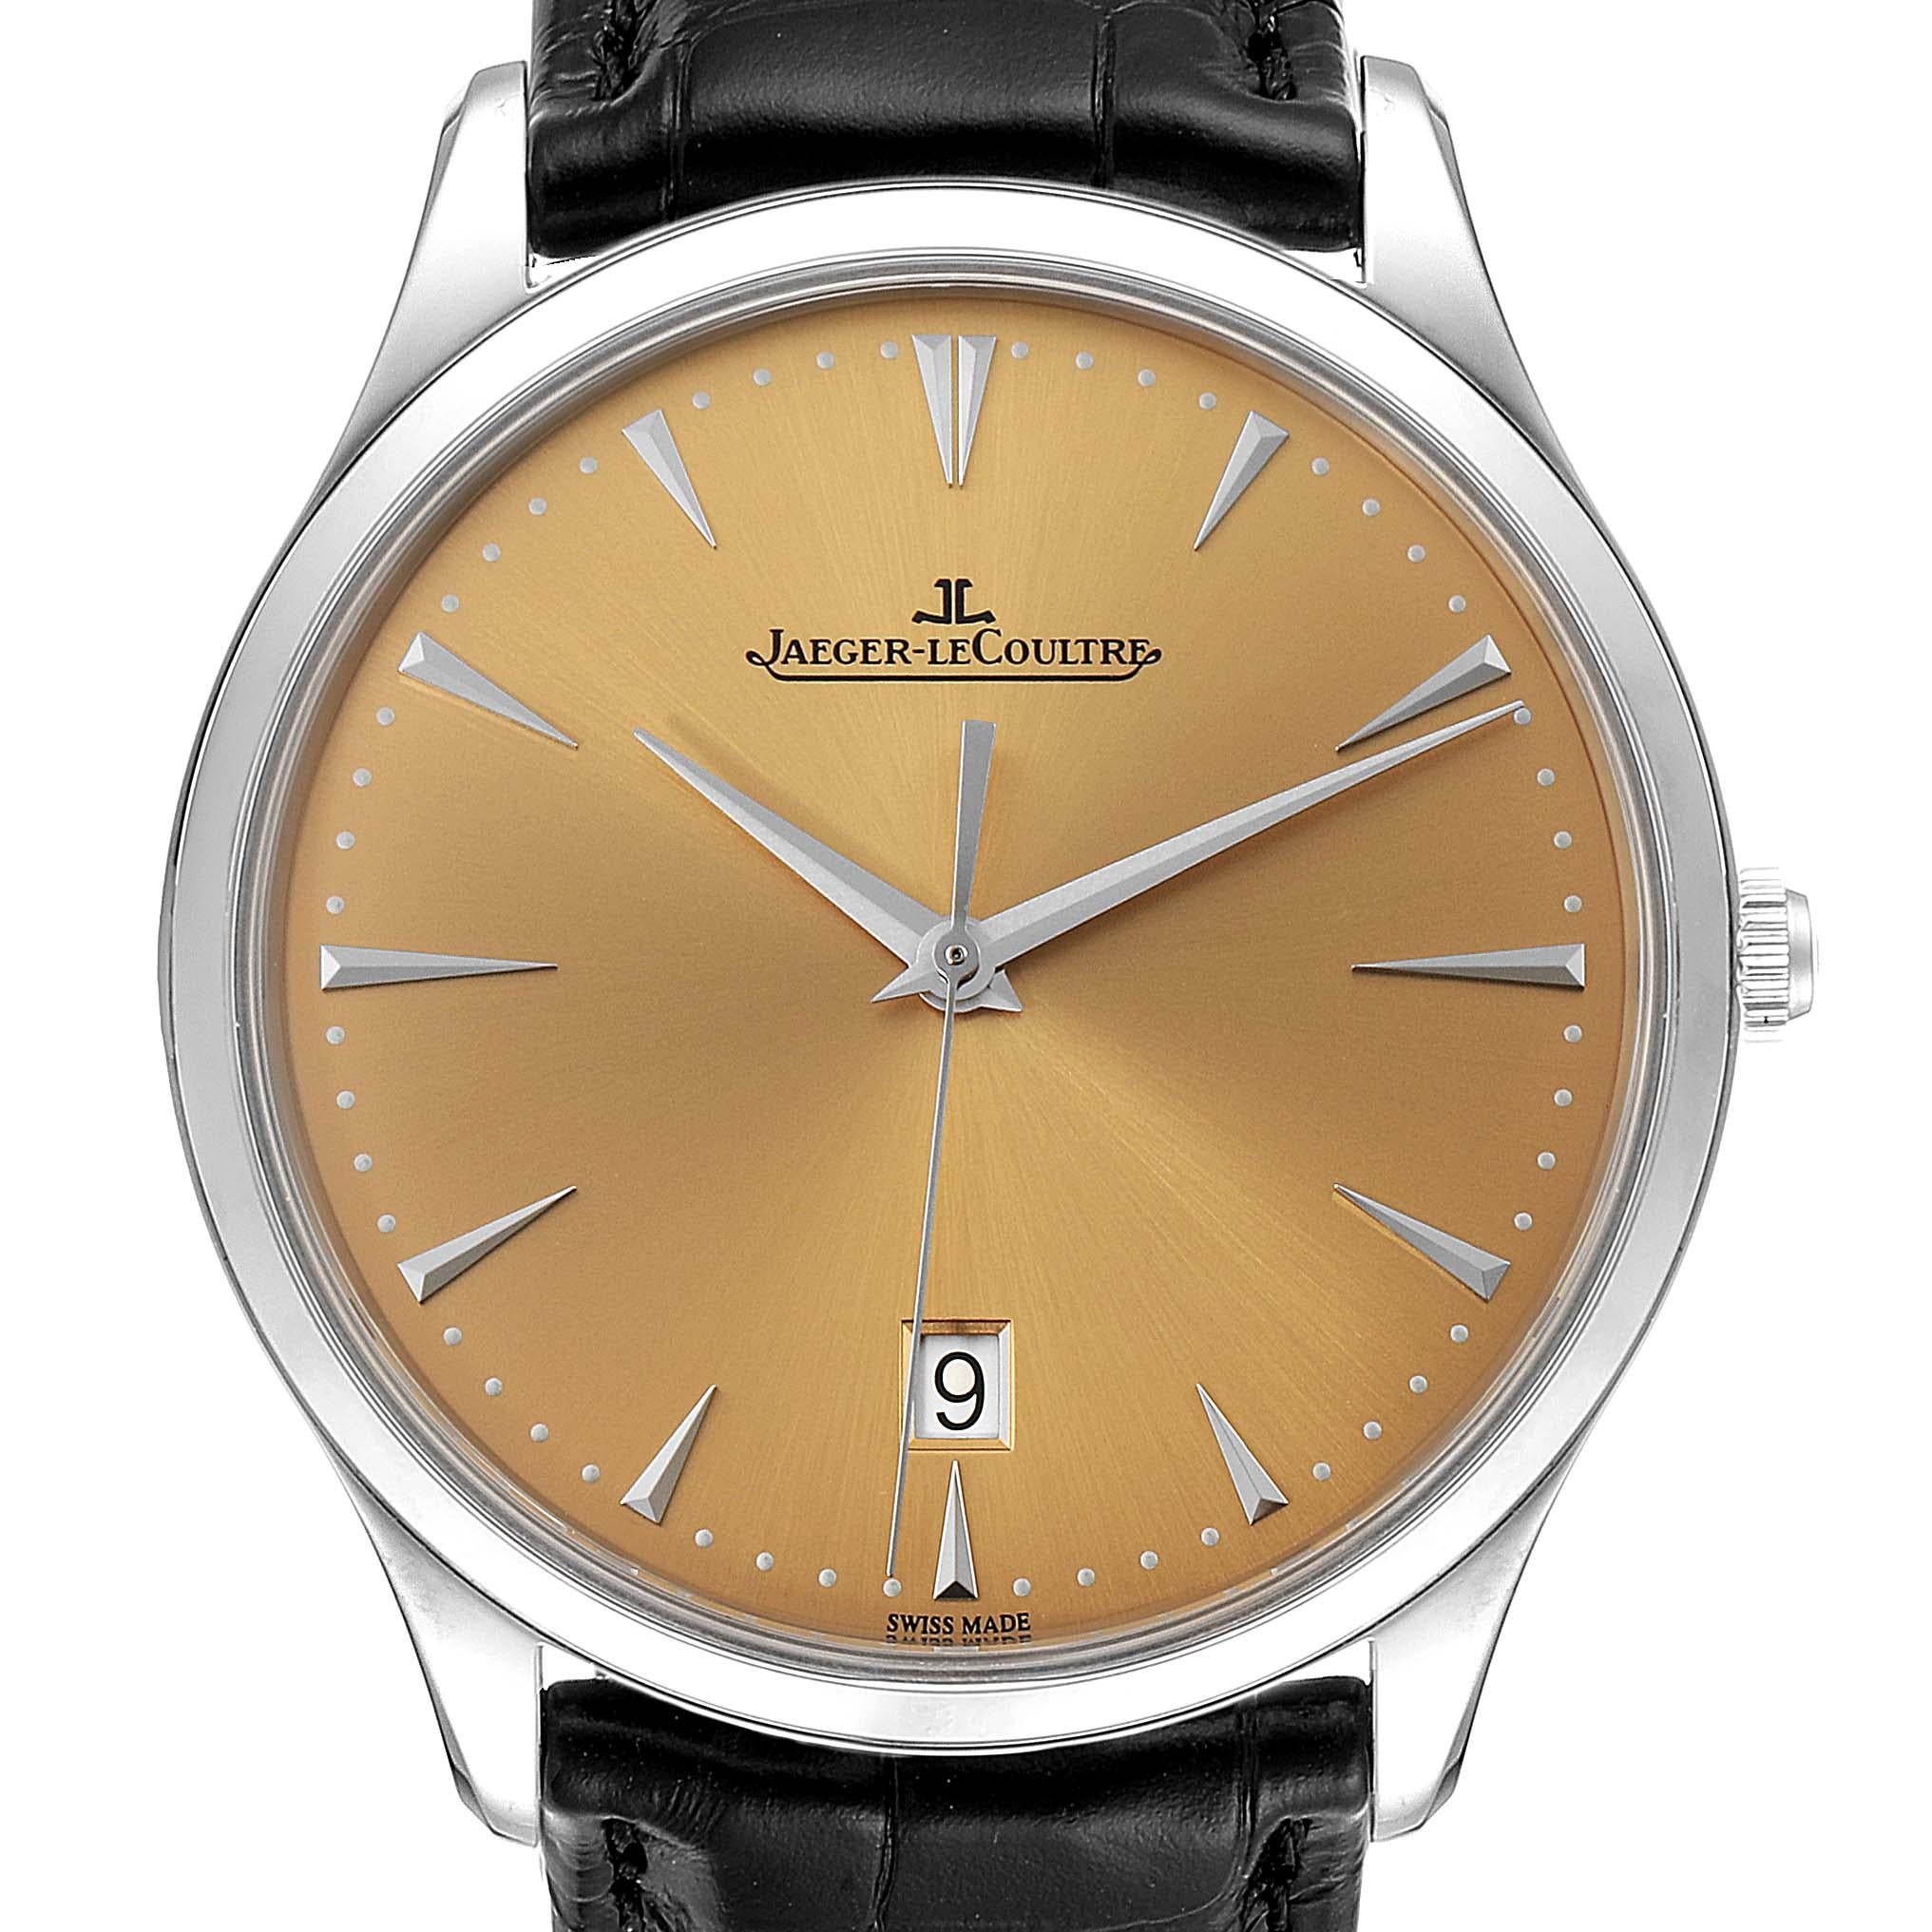 Jaeger Lecoultre Master Ultra Thin Mens Watch 174.8.37.s Q1288430 Unworn. Automatic self-winding movement. Stainless steel ultra-thin round case 40.0 mm in diameter. Curved lugs. Exhibition transparent sapphire crystal caseback secured by four